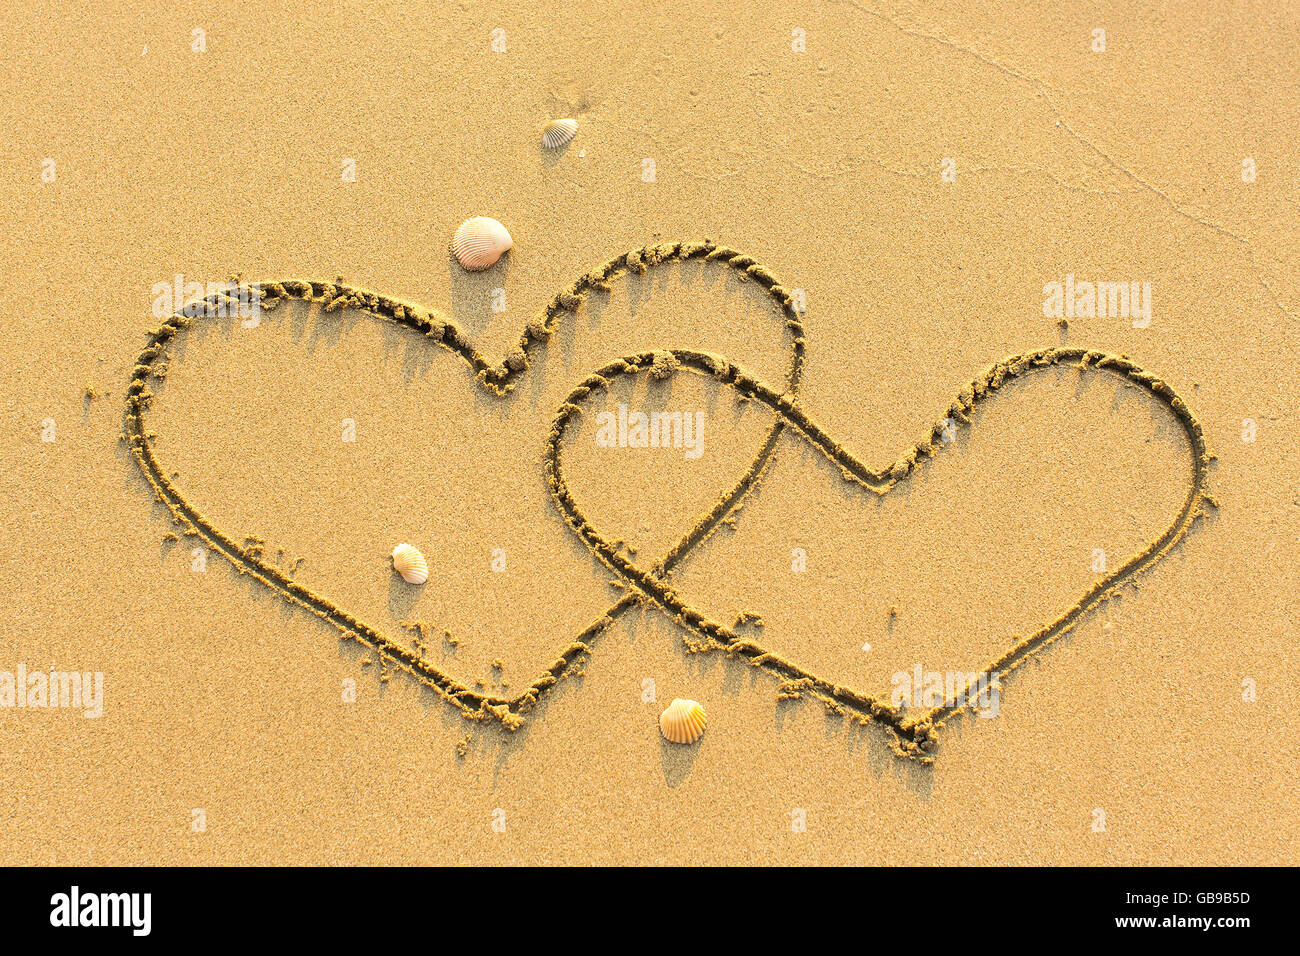 Two of hearts drawn on a sandy sea beach. Stock Photo